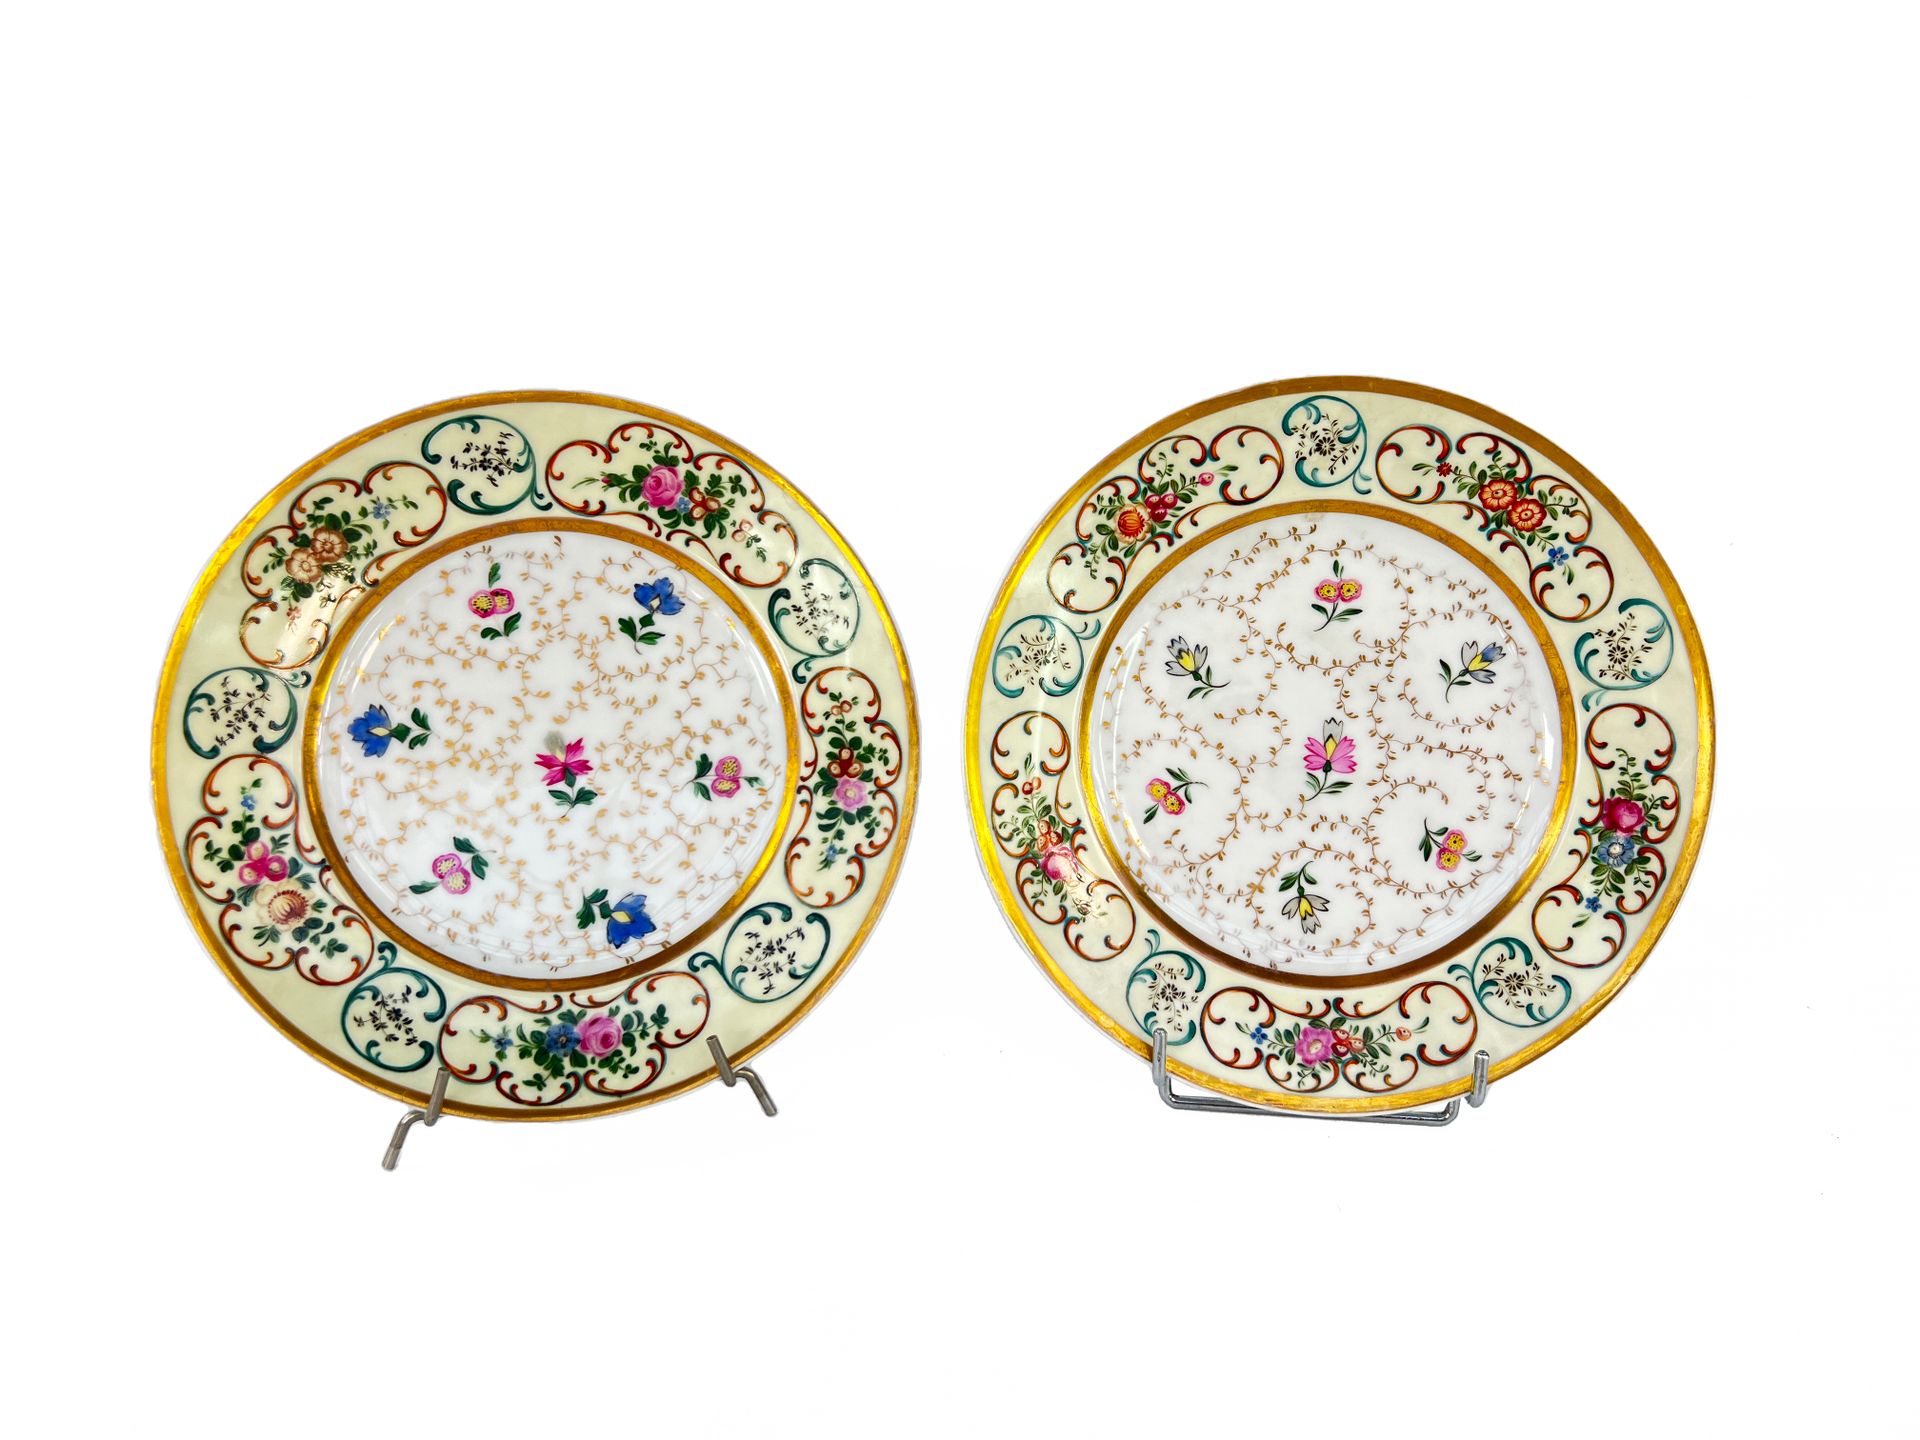 Null MOSCOW, 19th century

Two porcelain plates with polychrome decoration of fl&hellip;